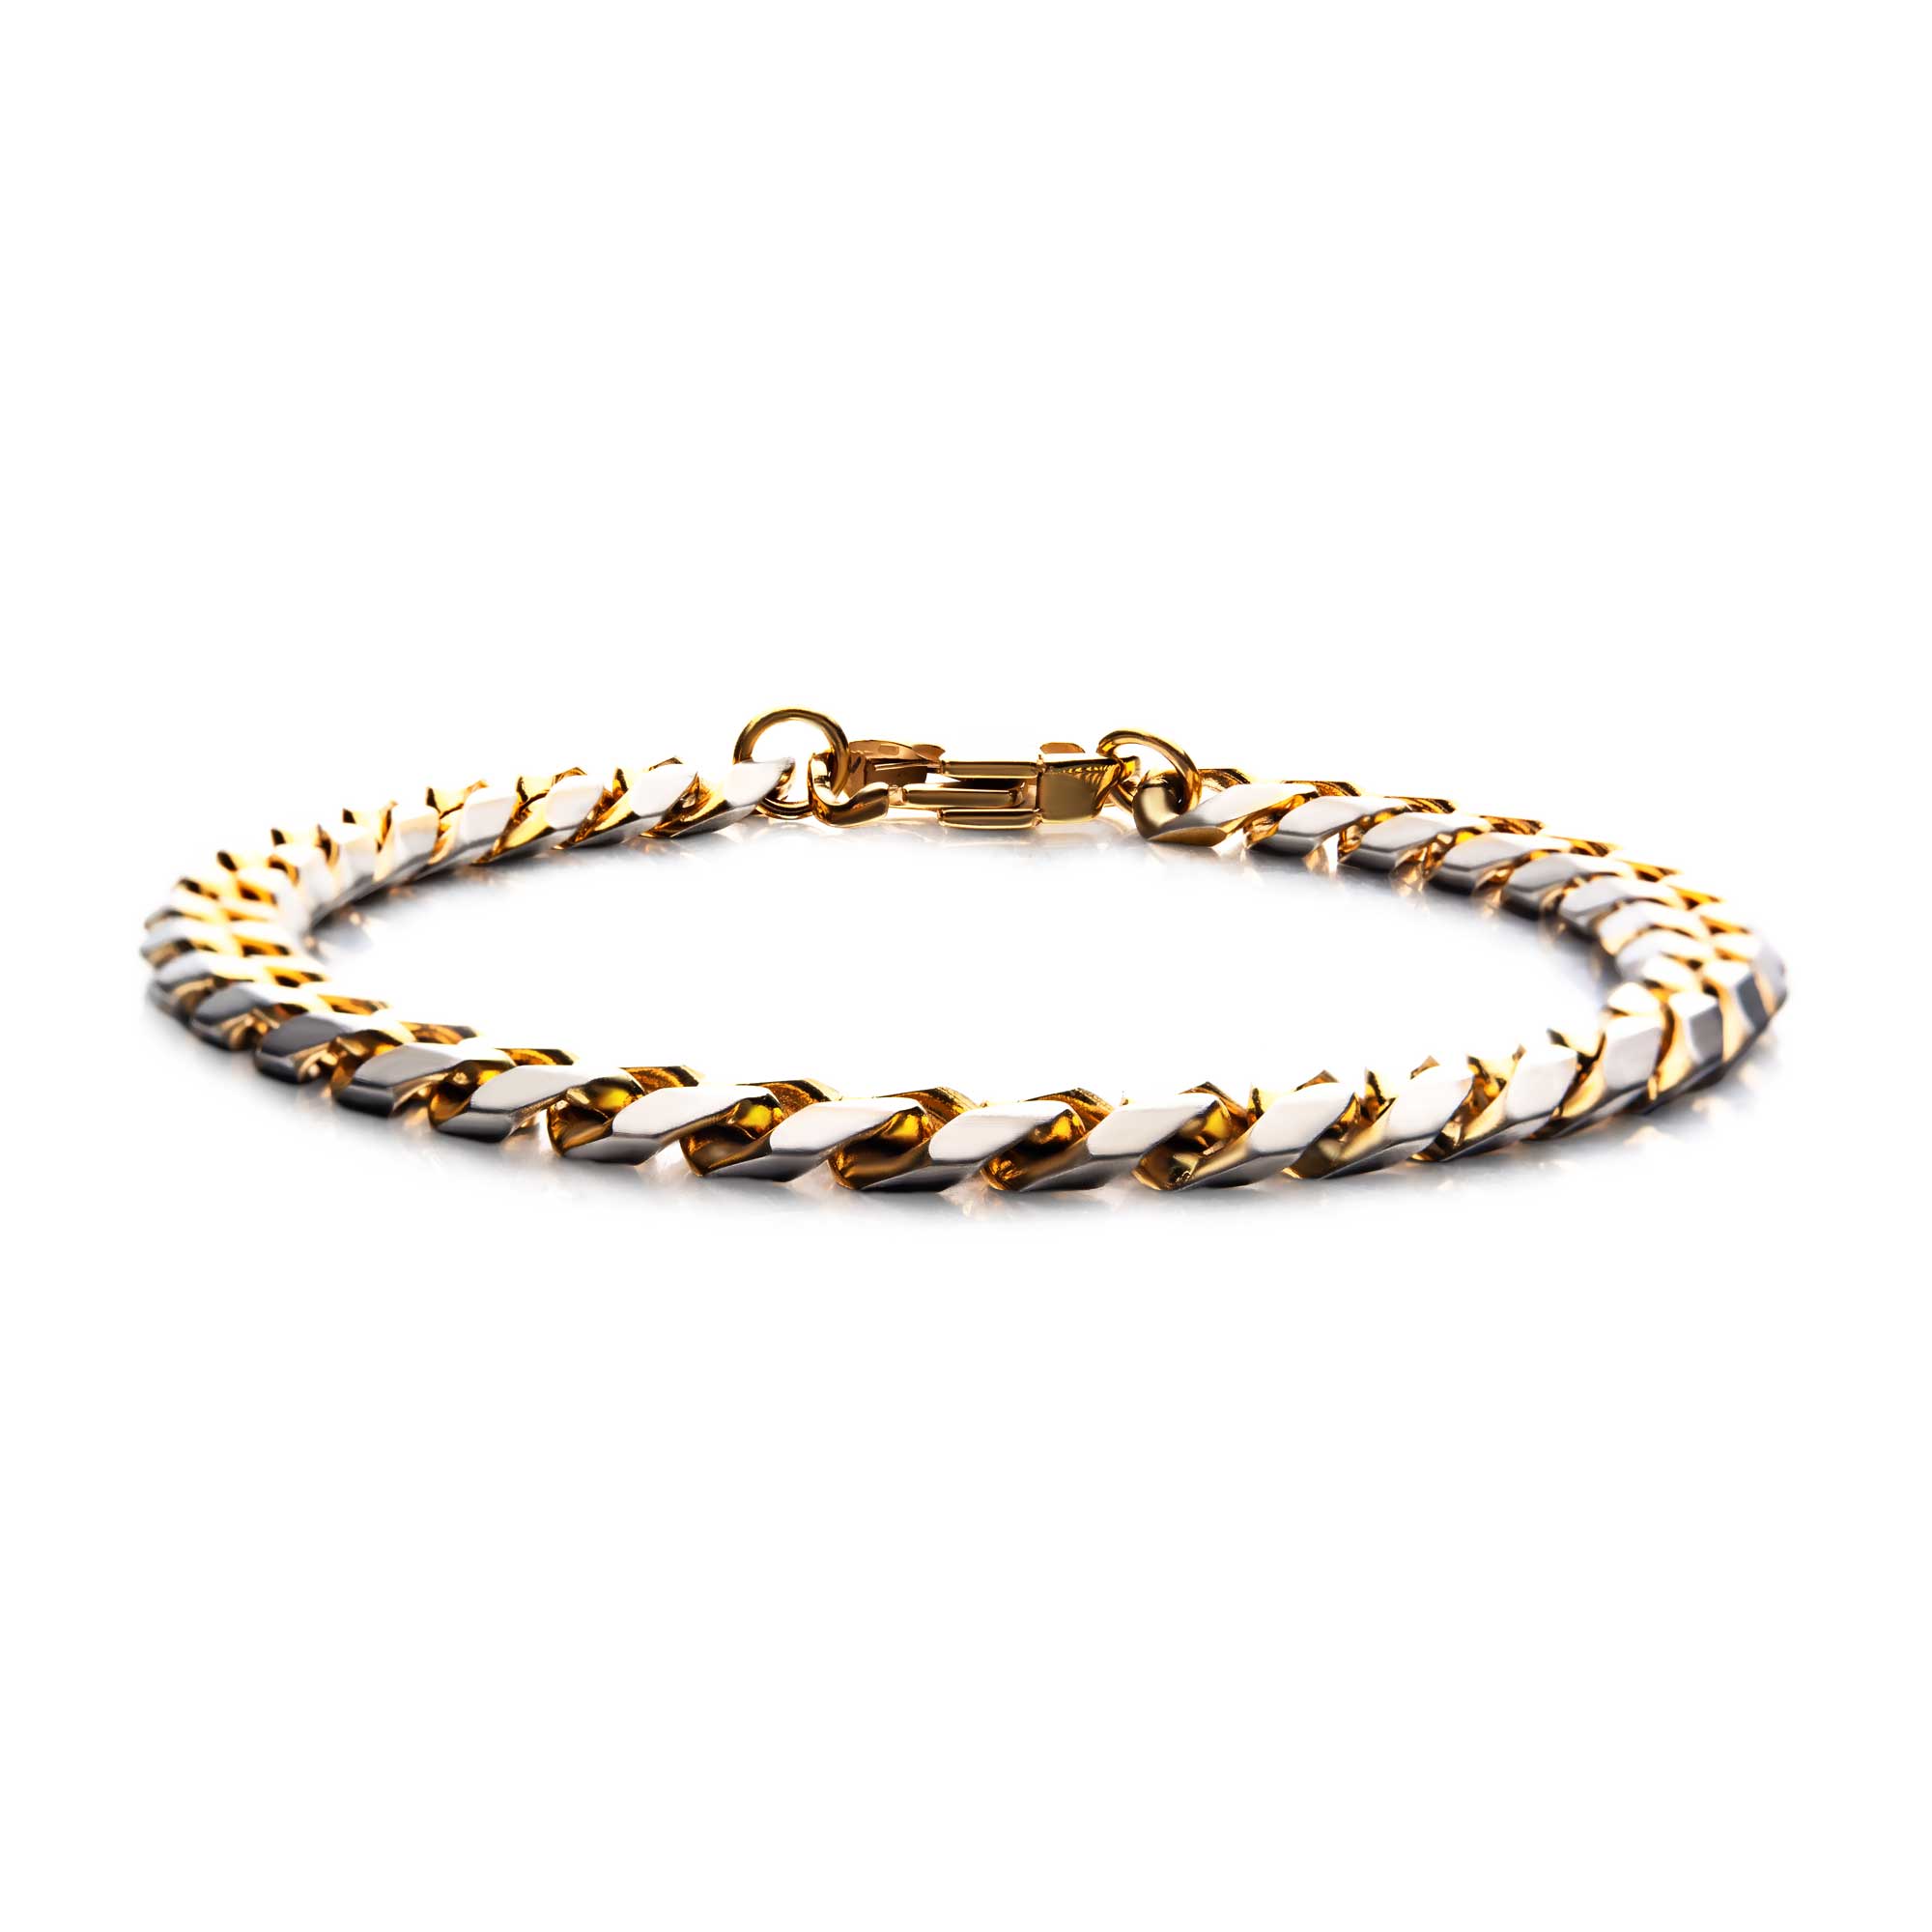 Stainless Steel Gold Plated 8mm Curb Chain with Lobster Clasp Carroll / Ochs Jewelers Monroe, MI